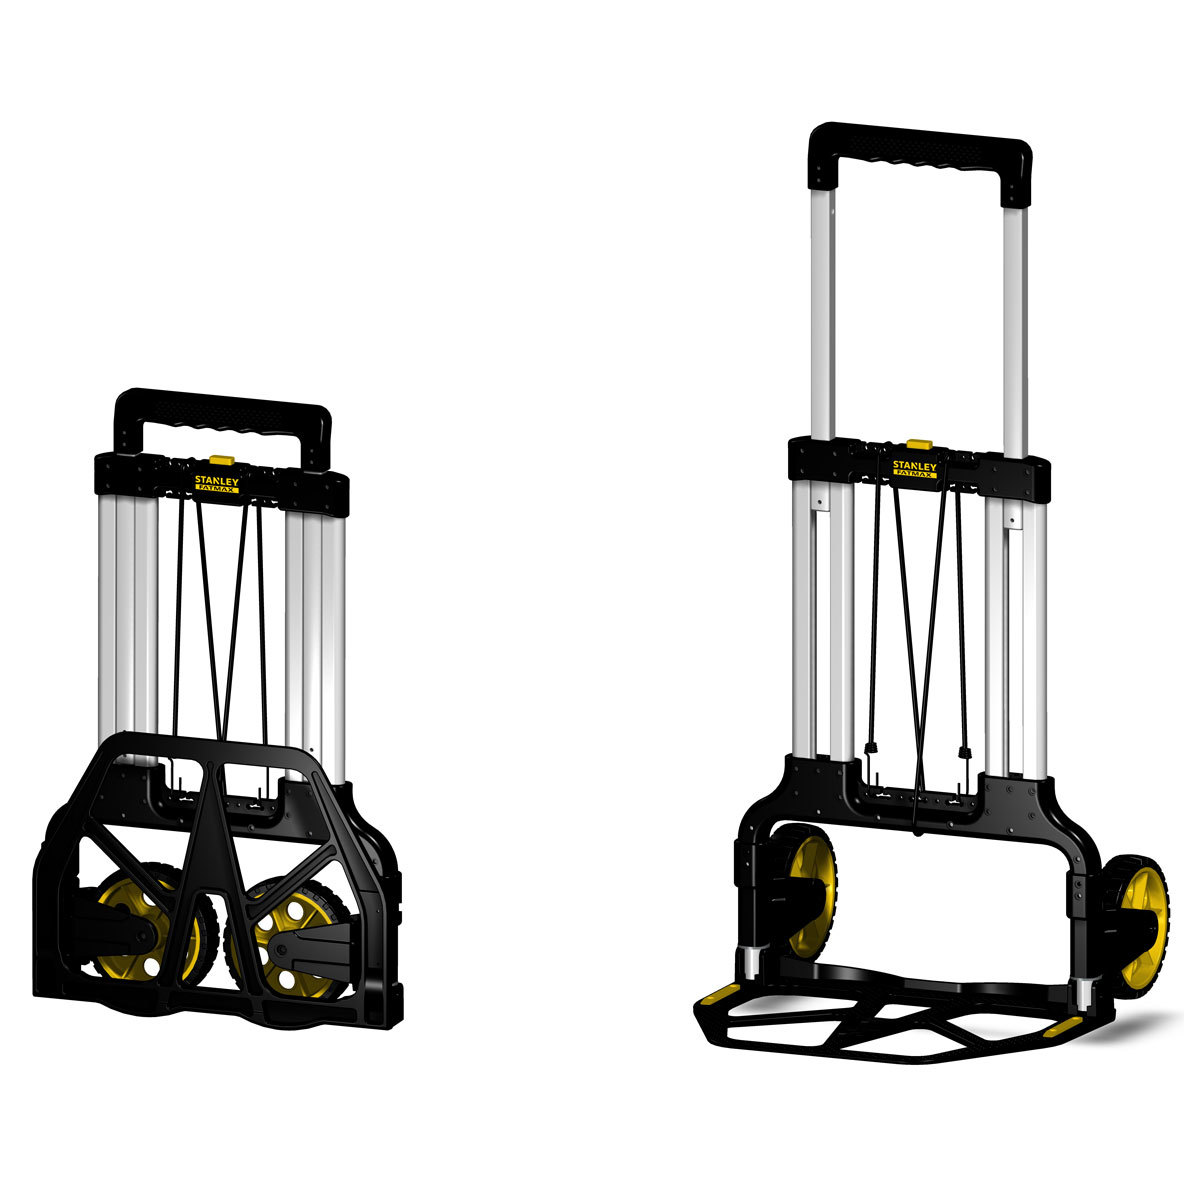 Cut out image of handtruck on white background showing folded and extended